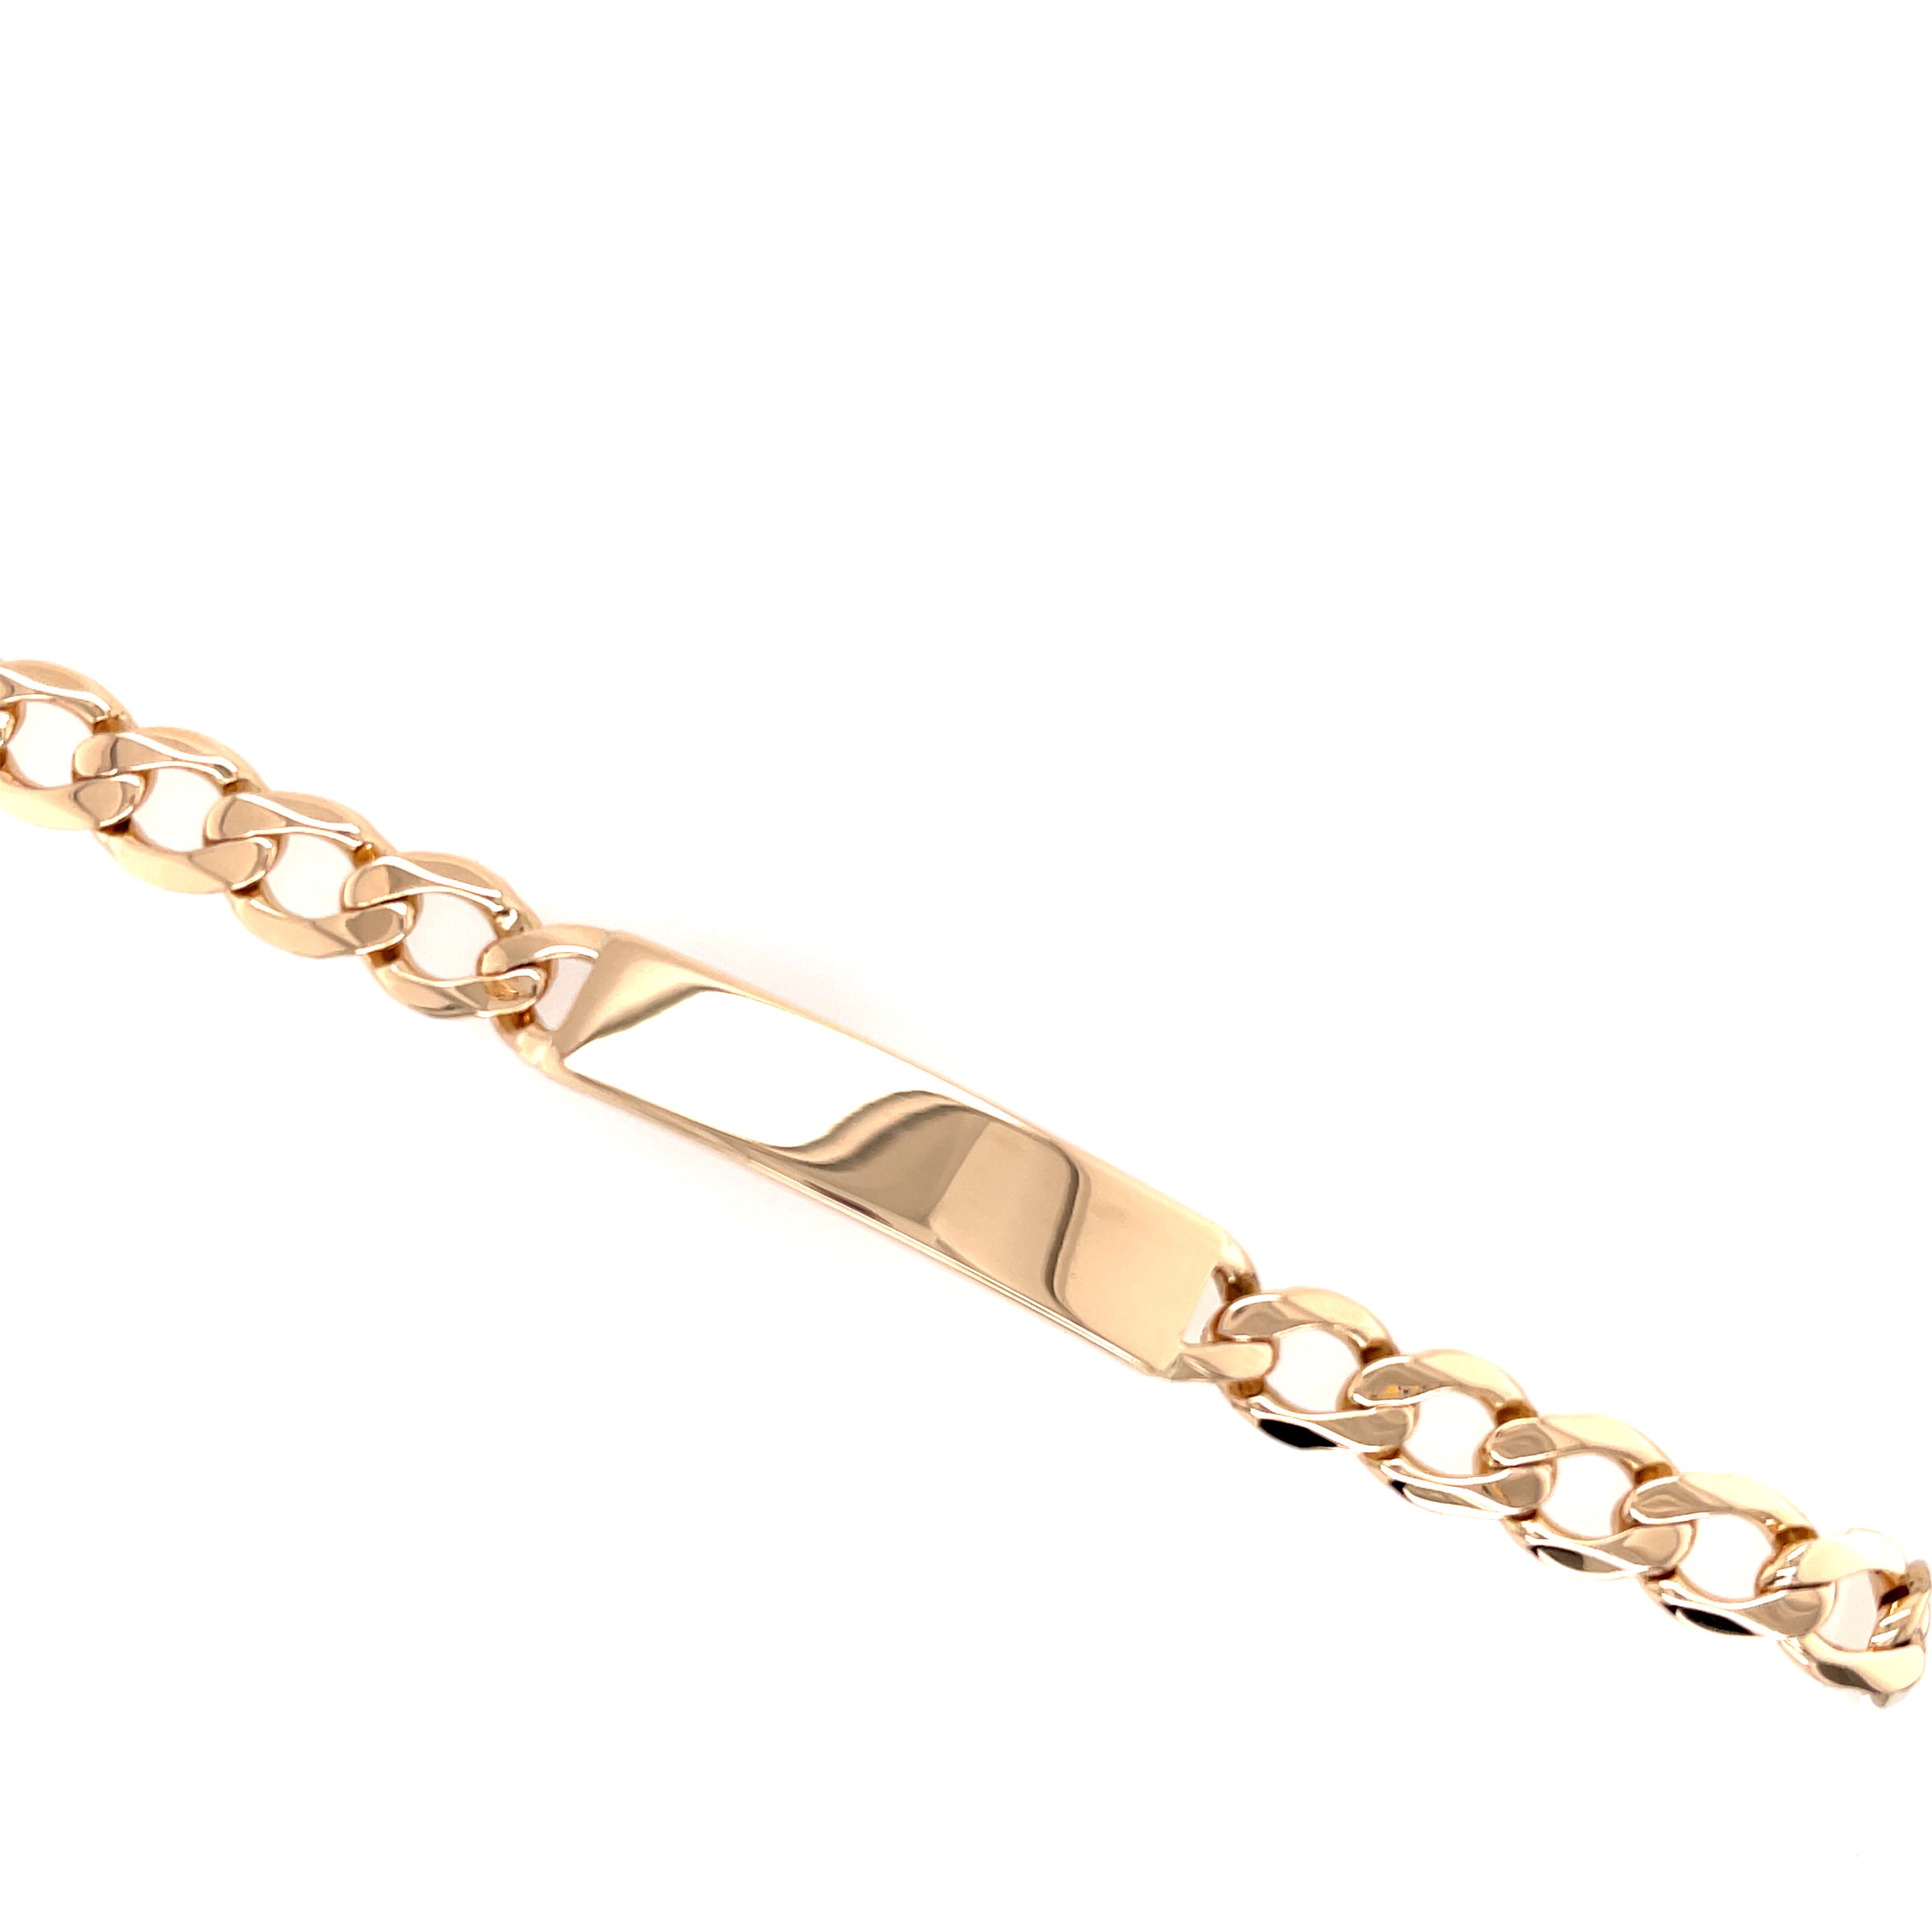 9ct Yellow Gold 9 Inch Curb Link Identity Bracelet - 32.00g